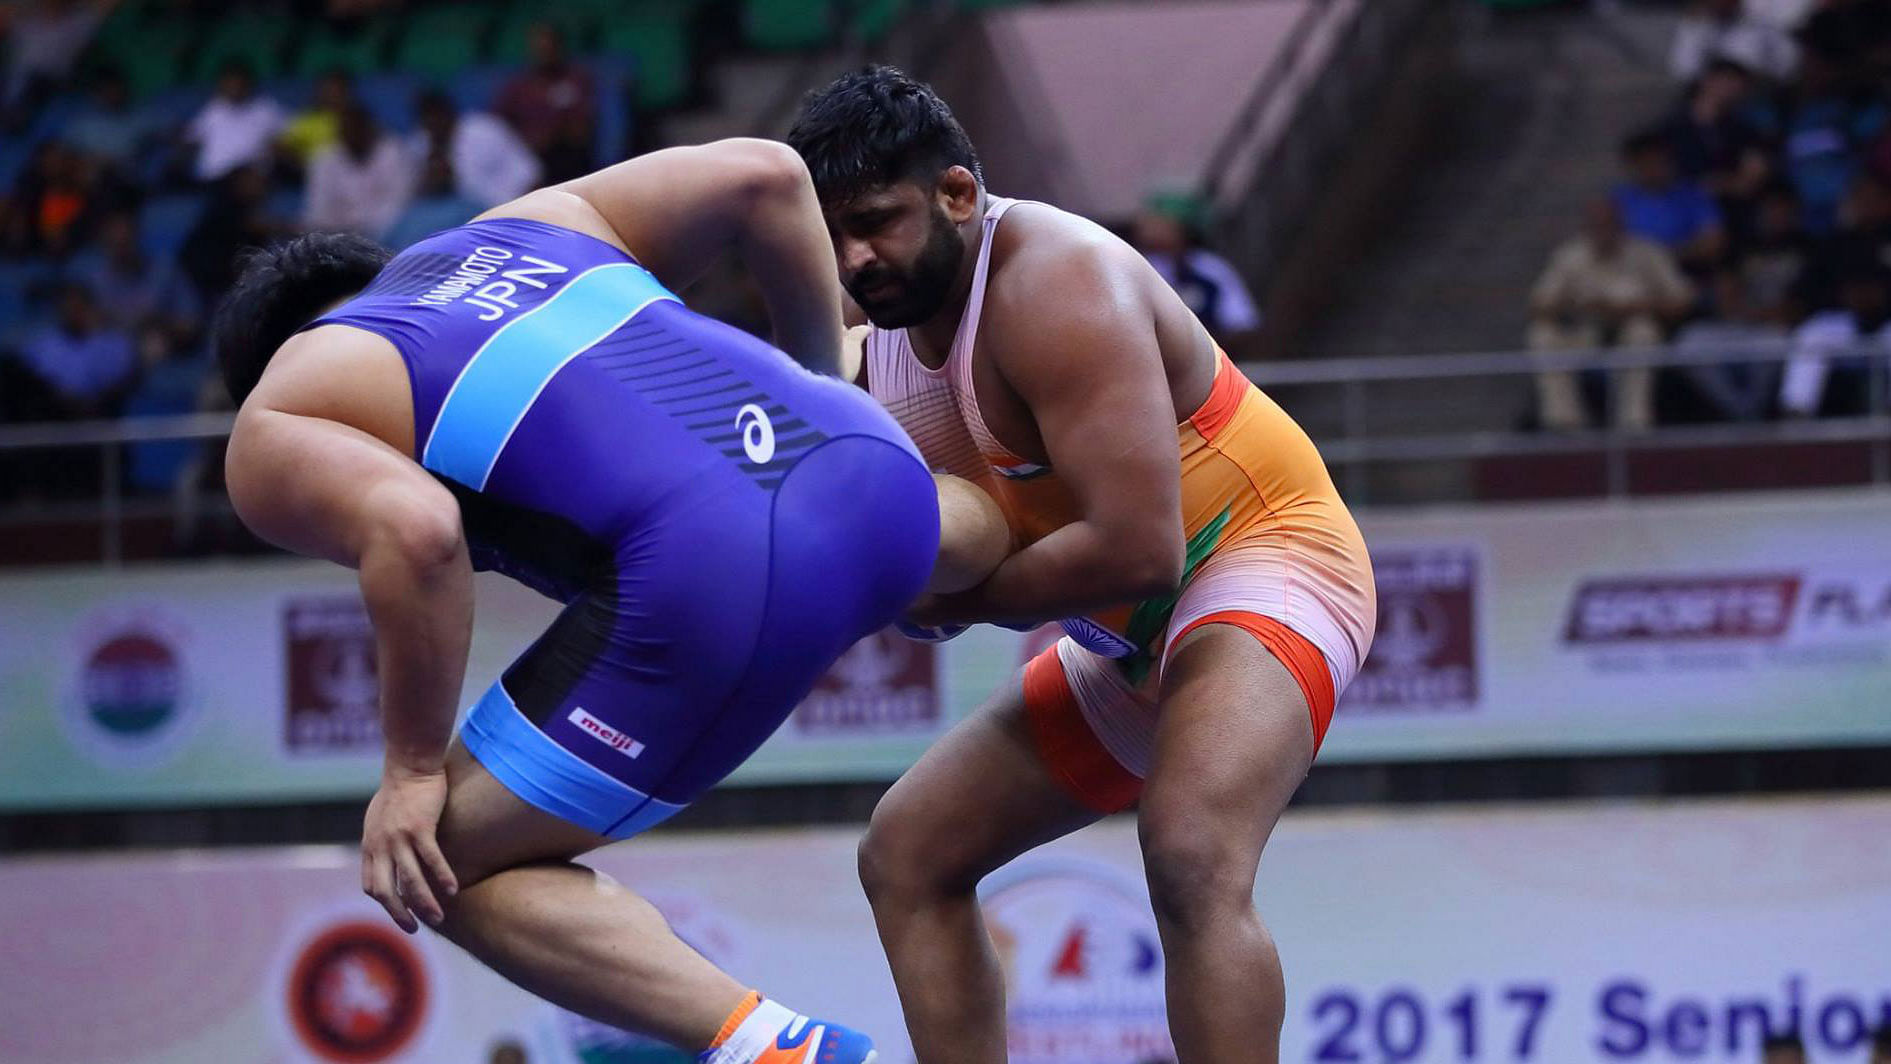 India’s Sumit Malik reached the semi-finals of the World Wrestling Championships.